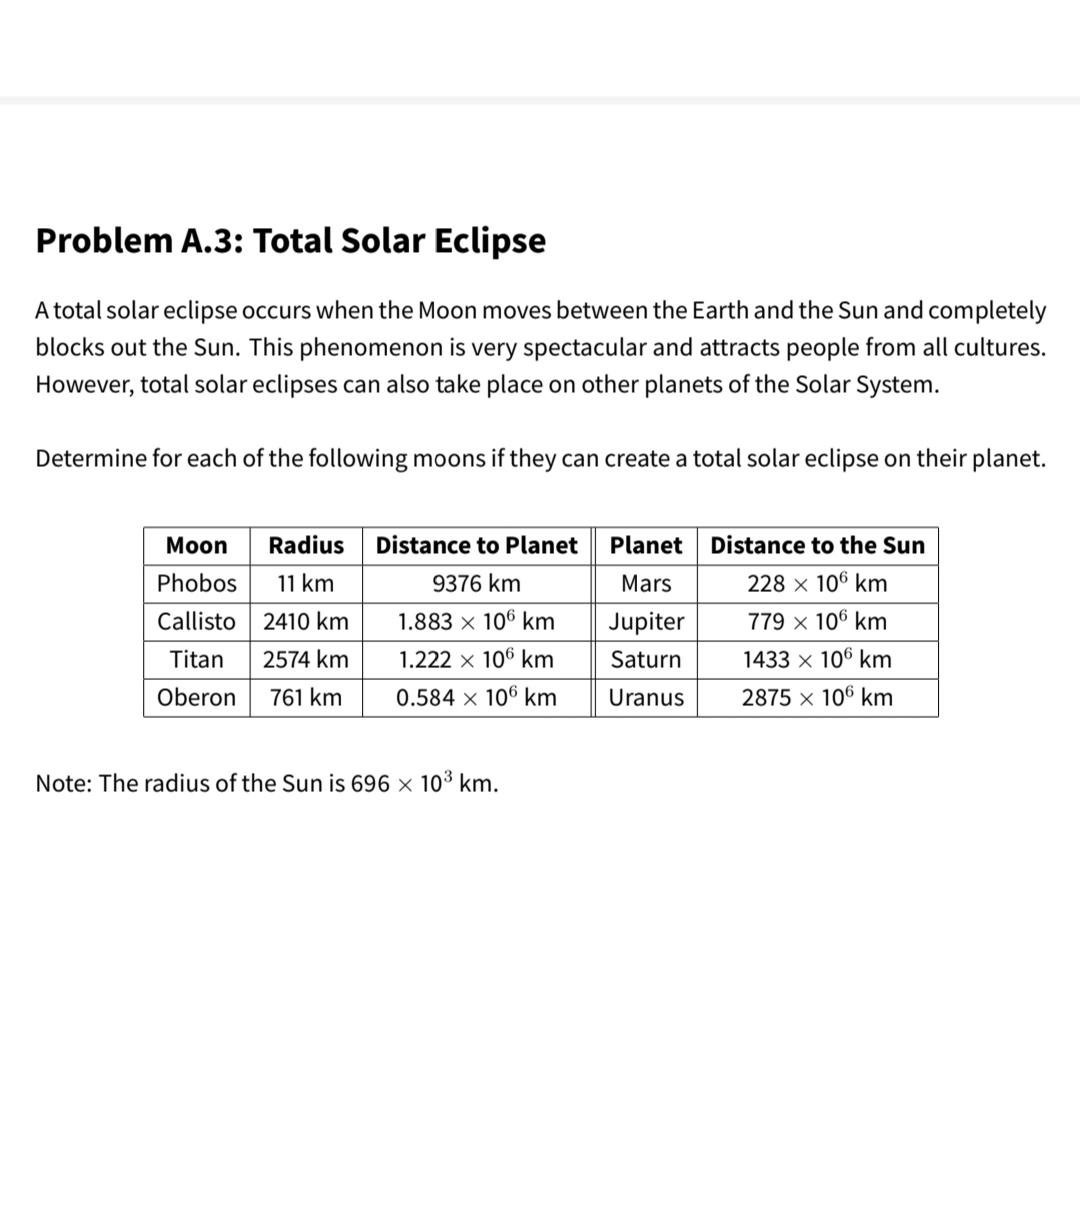 Problem A.3: Total Solar Eclipse
A total solar eclipse occurs when the Moon moves between the Earth and the Sun and completely
blocks out the Sun. This phenomenon is very spectacular and attracts people from all cultures.
However, total solar eclipses can also take place on other planets of the Solar System.
Determine for each of the following moons if they can create a total solar eclipse on their planet.
Мoon
Radius
Distance to Planet
Planet
Distance to the Sun
Phobos
11 km
9376 km
Mars
228 x 106 km
Callisto
2410 km
1.883 x 106 km
Jupiter
779 x 106 km
Titan
2574 km
1.222 x 106 km
Saturn
1433 x 106 km
Oberon
761 km
0.584 x 106 km
Uranus
2875 x 106 km
Note: The radius of the Sun is 696 × 10³ km.
